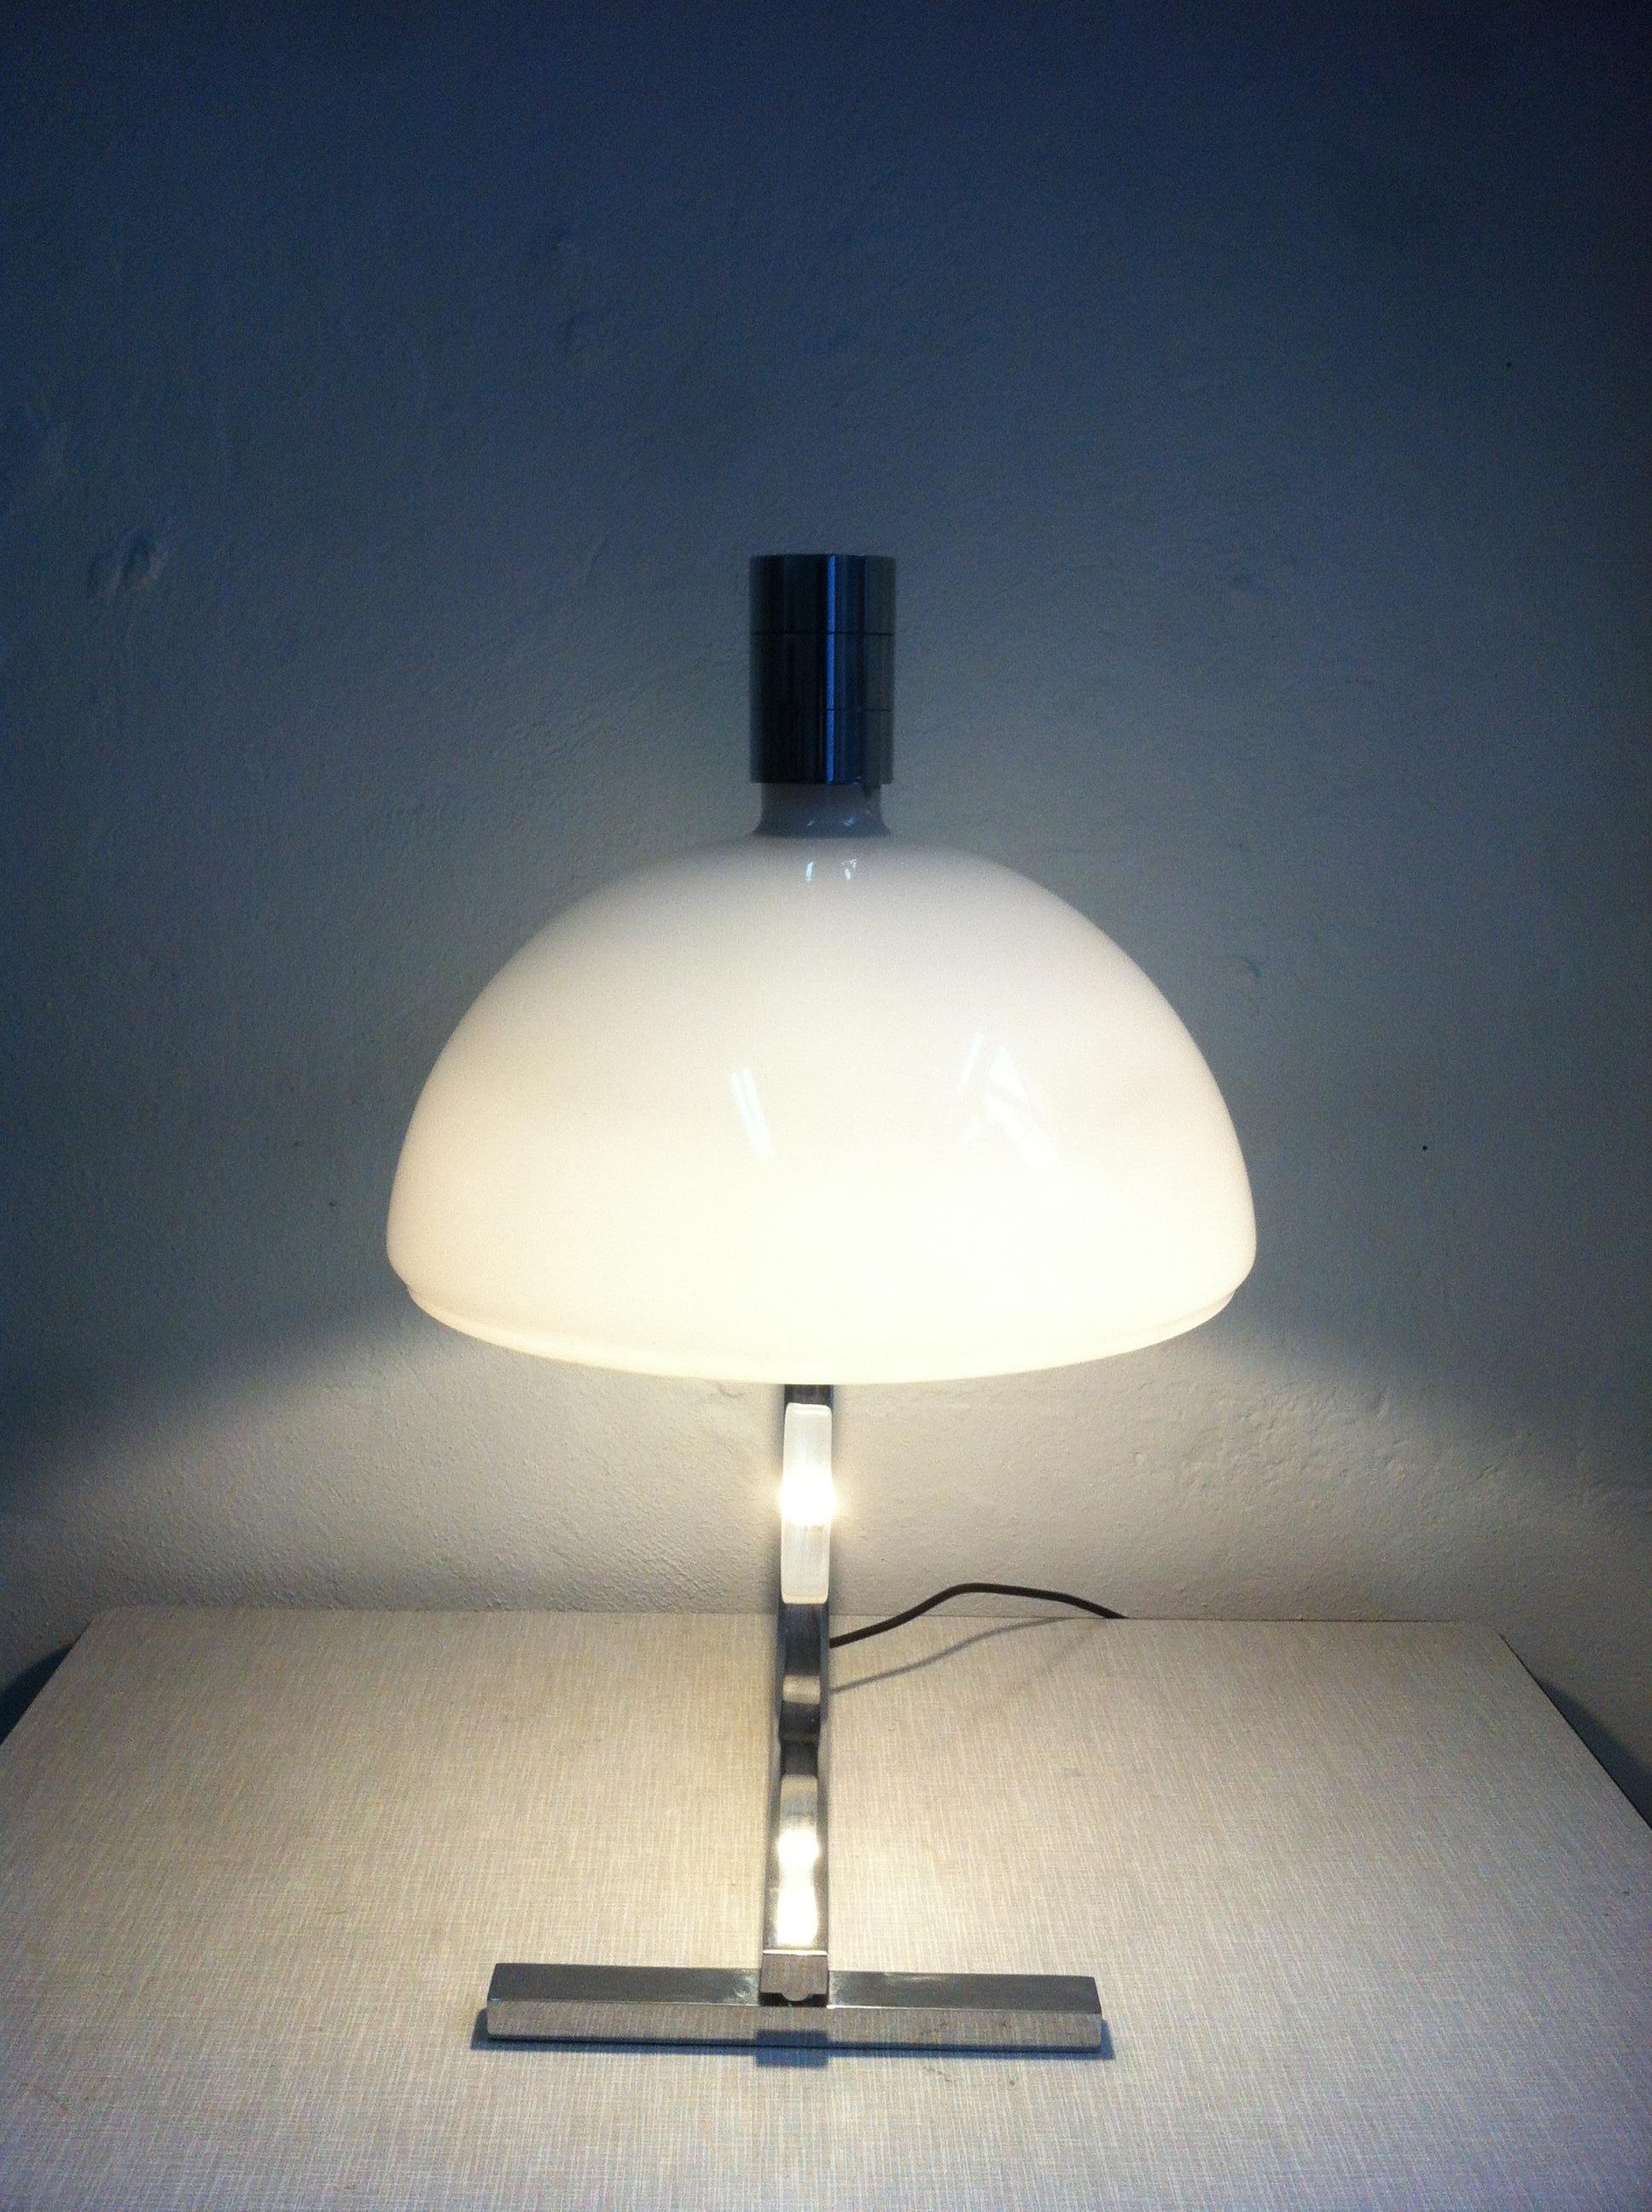 Midcentury AM/AS Table Lamp by Helg, Piva, and Albini for Sirrah Large, 1969 (Mitte des 20. Jahrhunderts) im Angebot